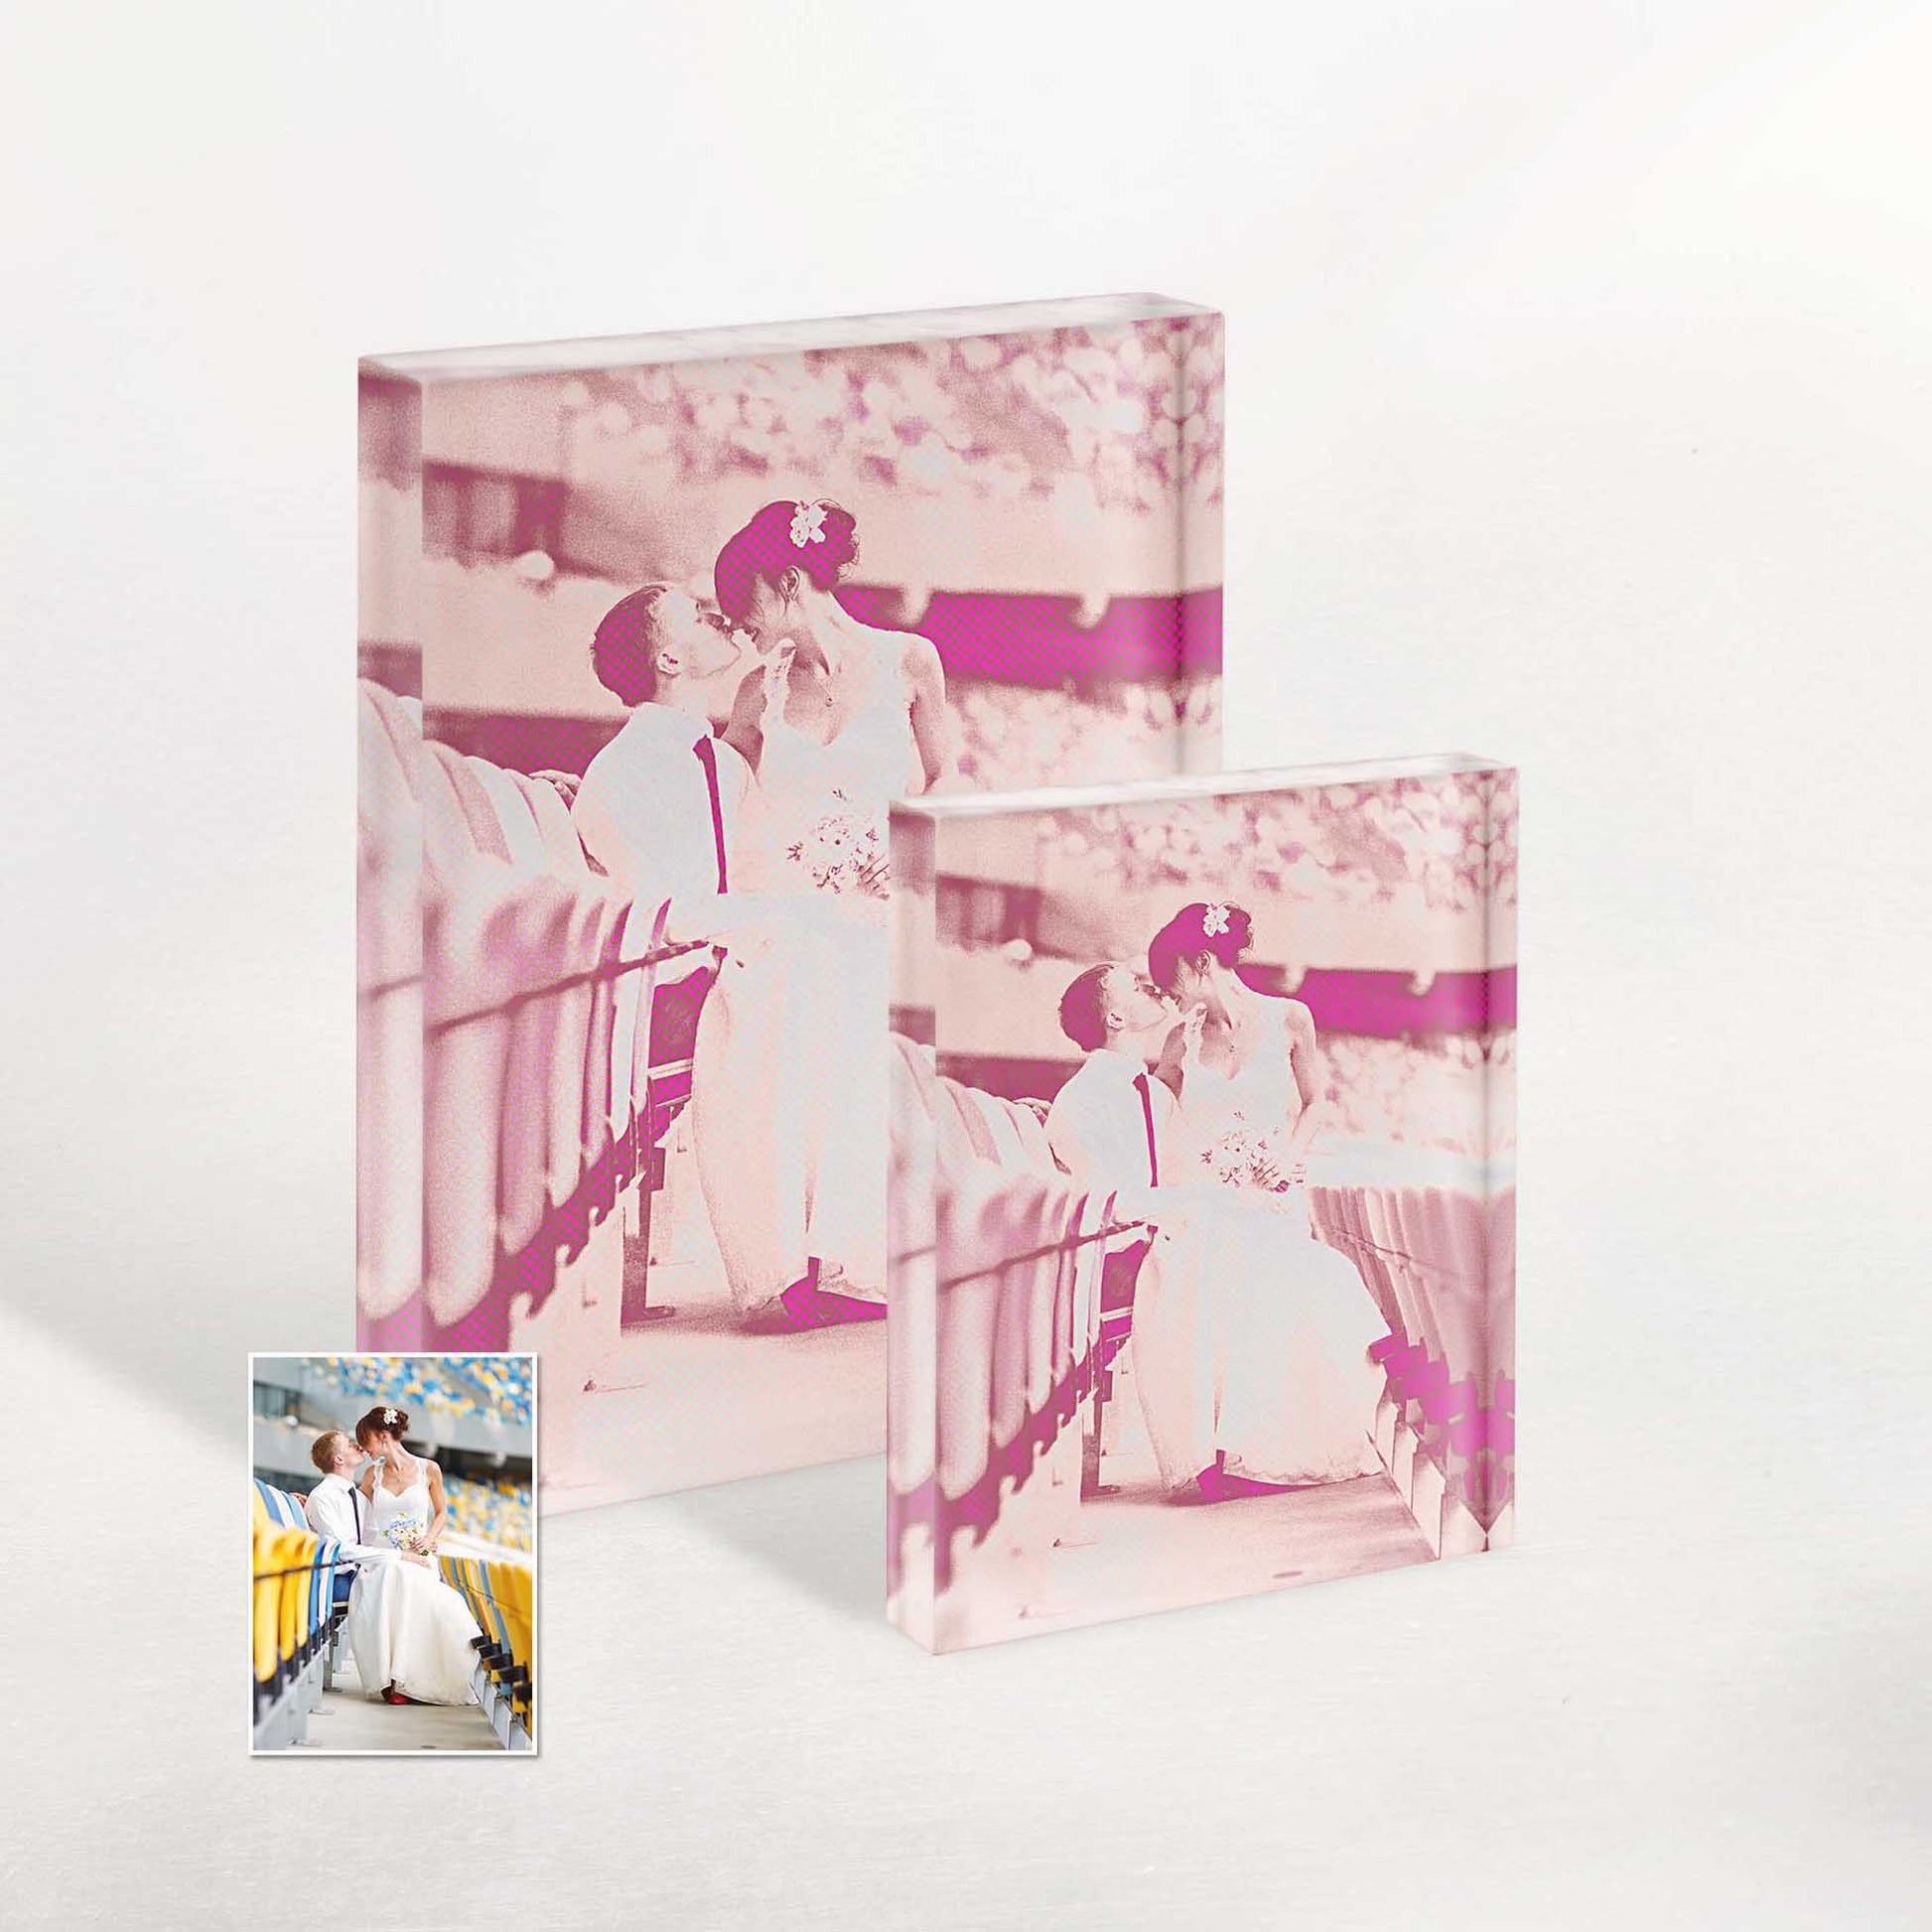 Bring a pop of vibrant charm to your home decor with the Personalised Pink Pop Halftone Acrylic Block Photo. Its exciting and chic design instantly grabs attention and adds a touch of elegance to any space